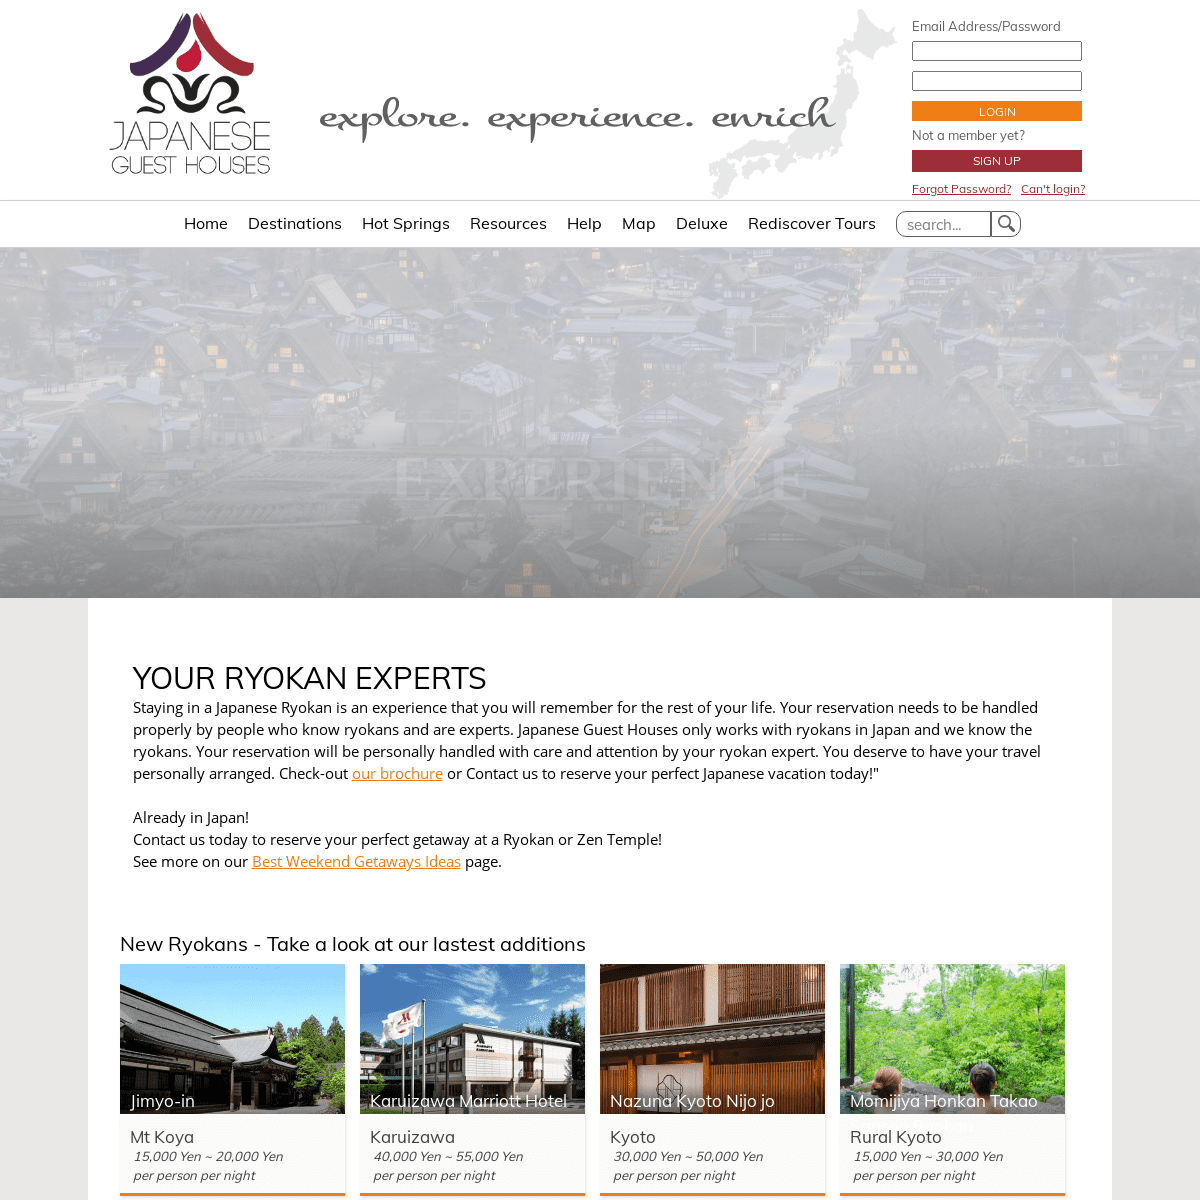 A complete backup of https://japaneseguesthouses.com